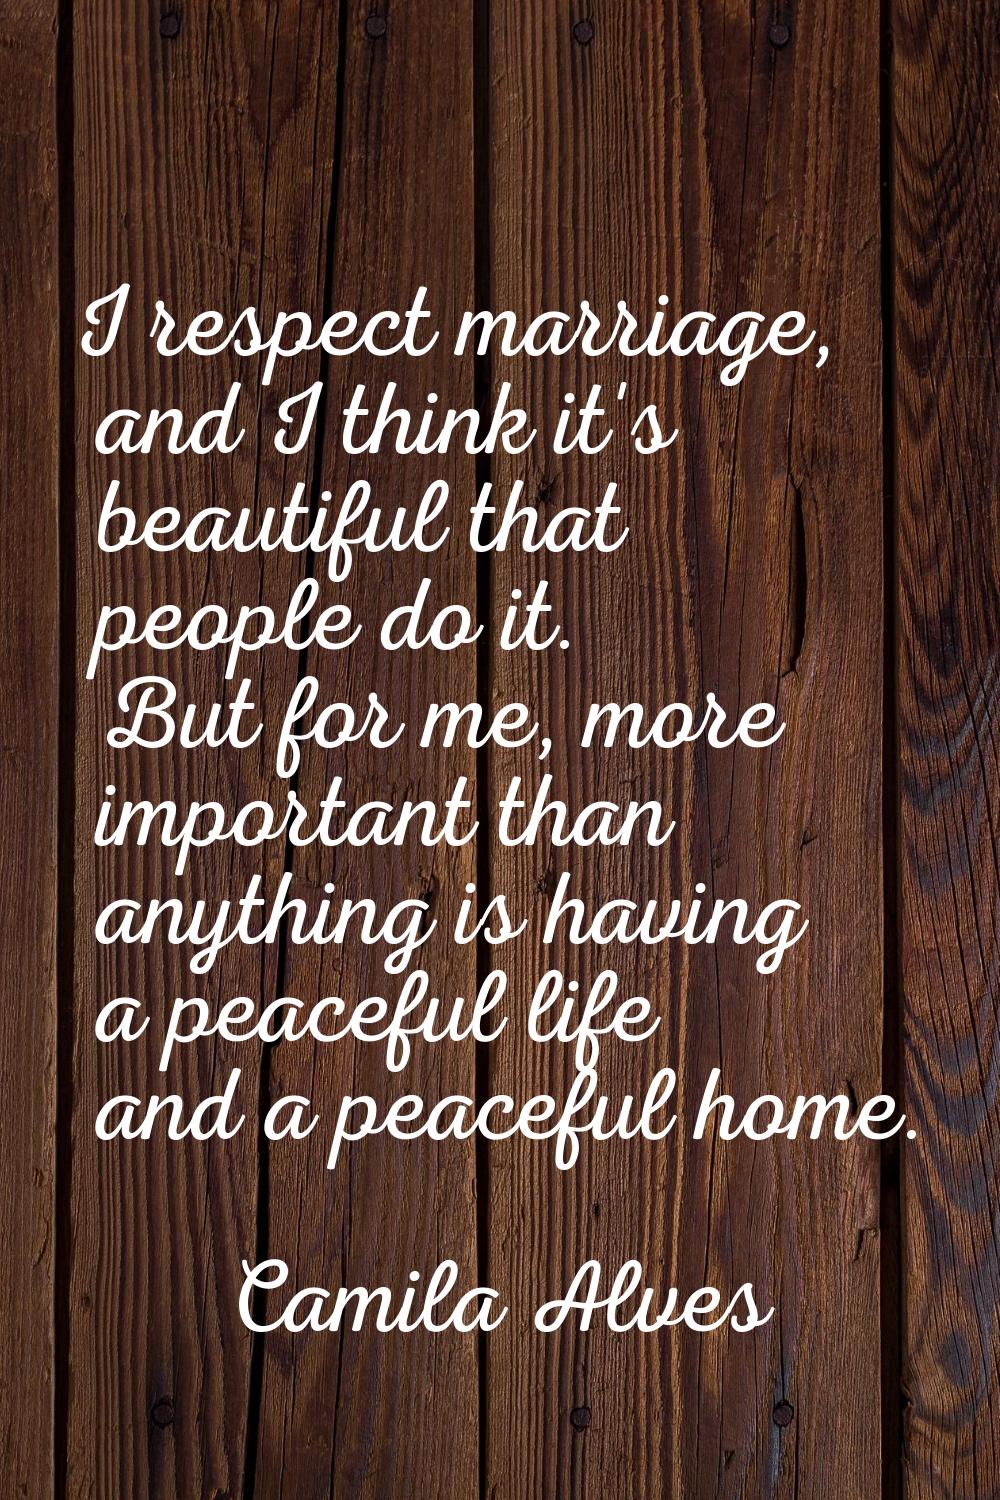 I respect marriage, and I think it's beautiful that people do it. But for me, more important than a